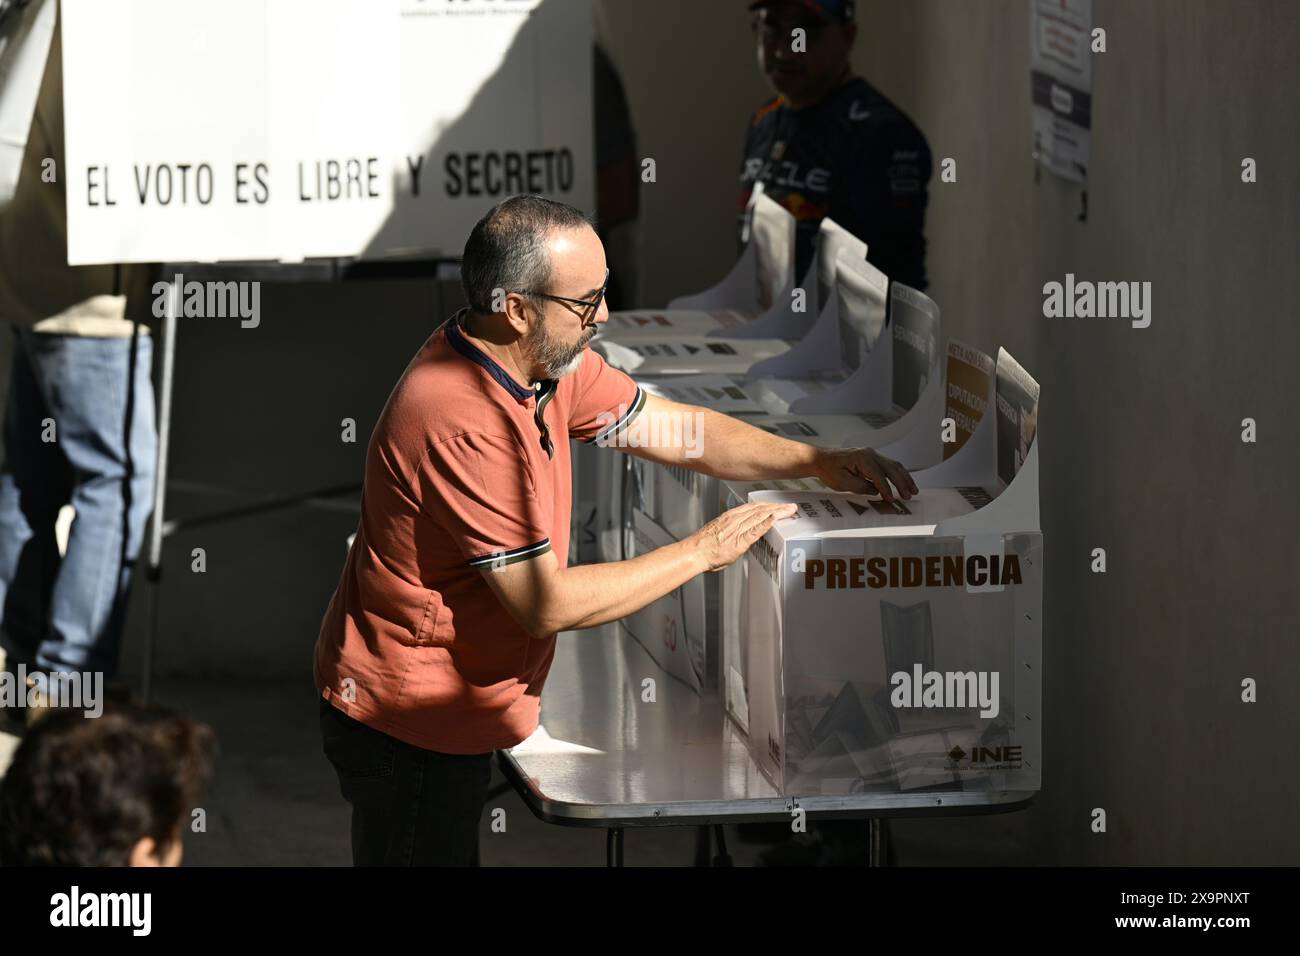 Mexico City, Mexico. 2nd June, 2024. A voter casts his ballot at a polling station in Mexico City, Mexico, June 2, 2024. Sunday's general elections are considered the largest in Mexico's modern history, with the presidency, legislative seats, governorships and local government positions up for grabs. Credit: Li Muzi/Xinhua/Alamy Live News Stock Photo